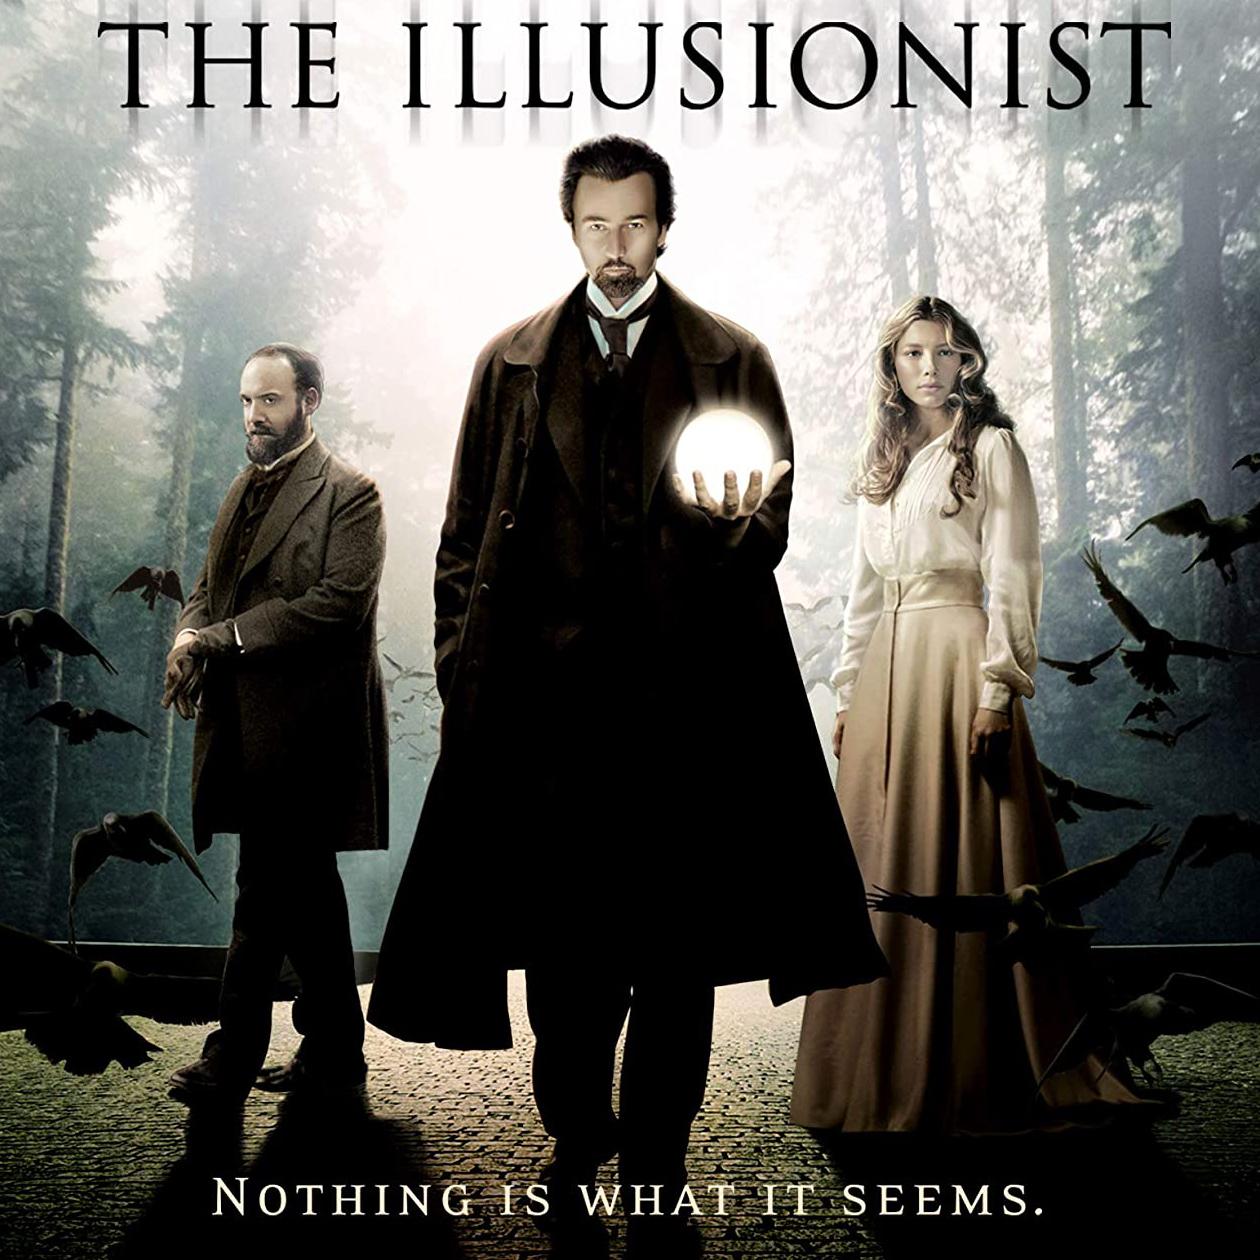 The Illusionist Movie for Free